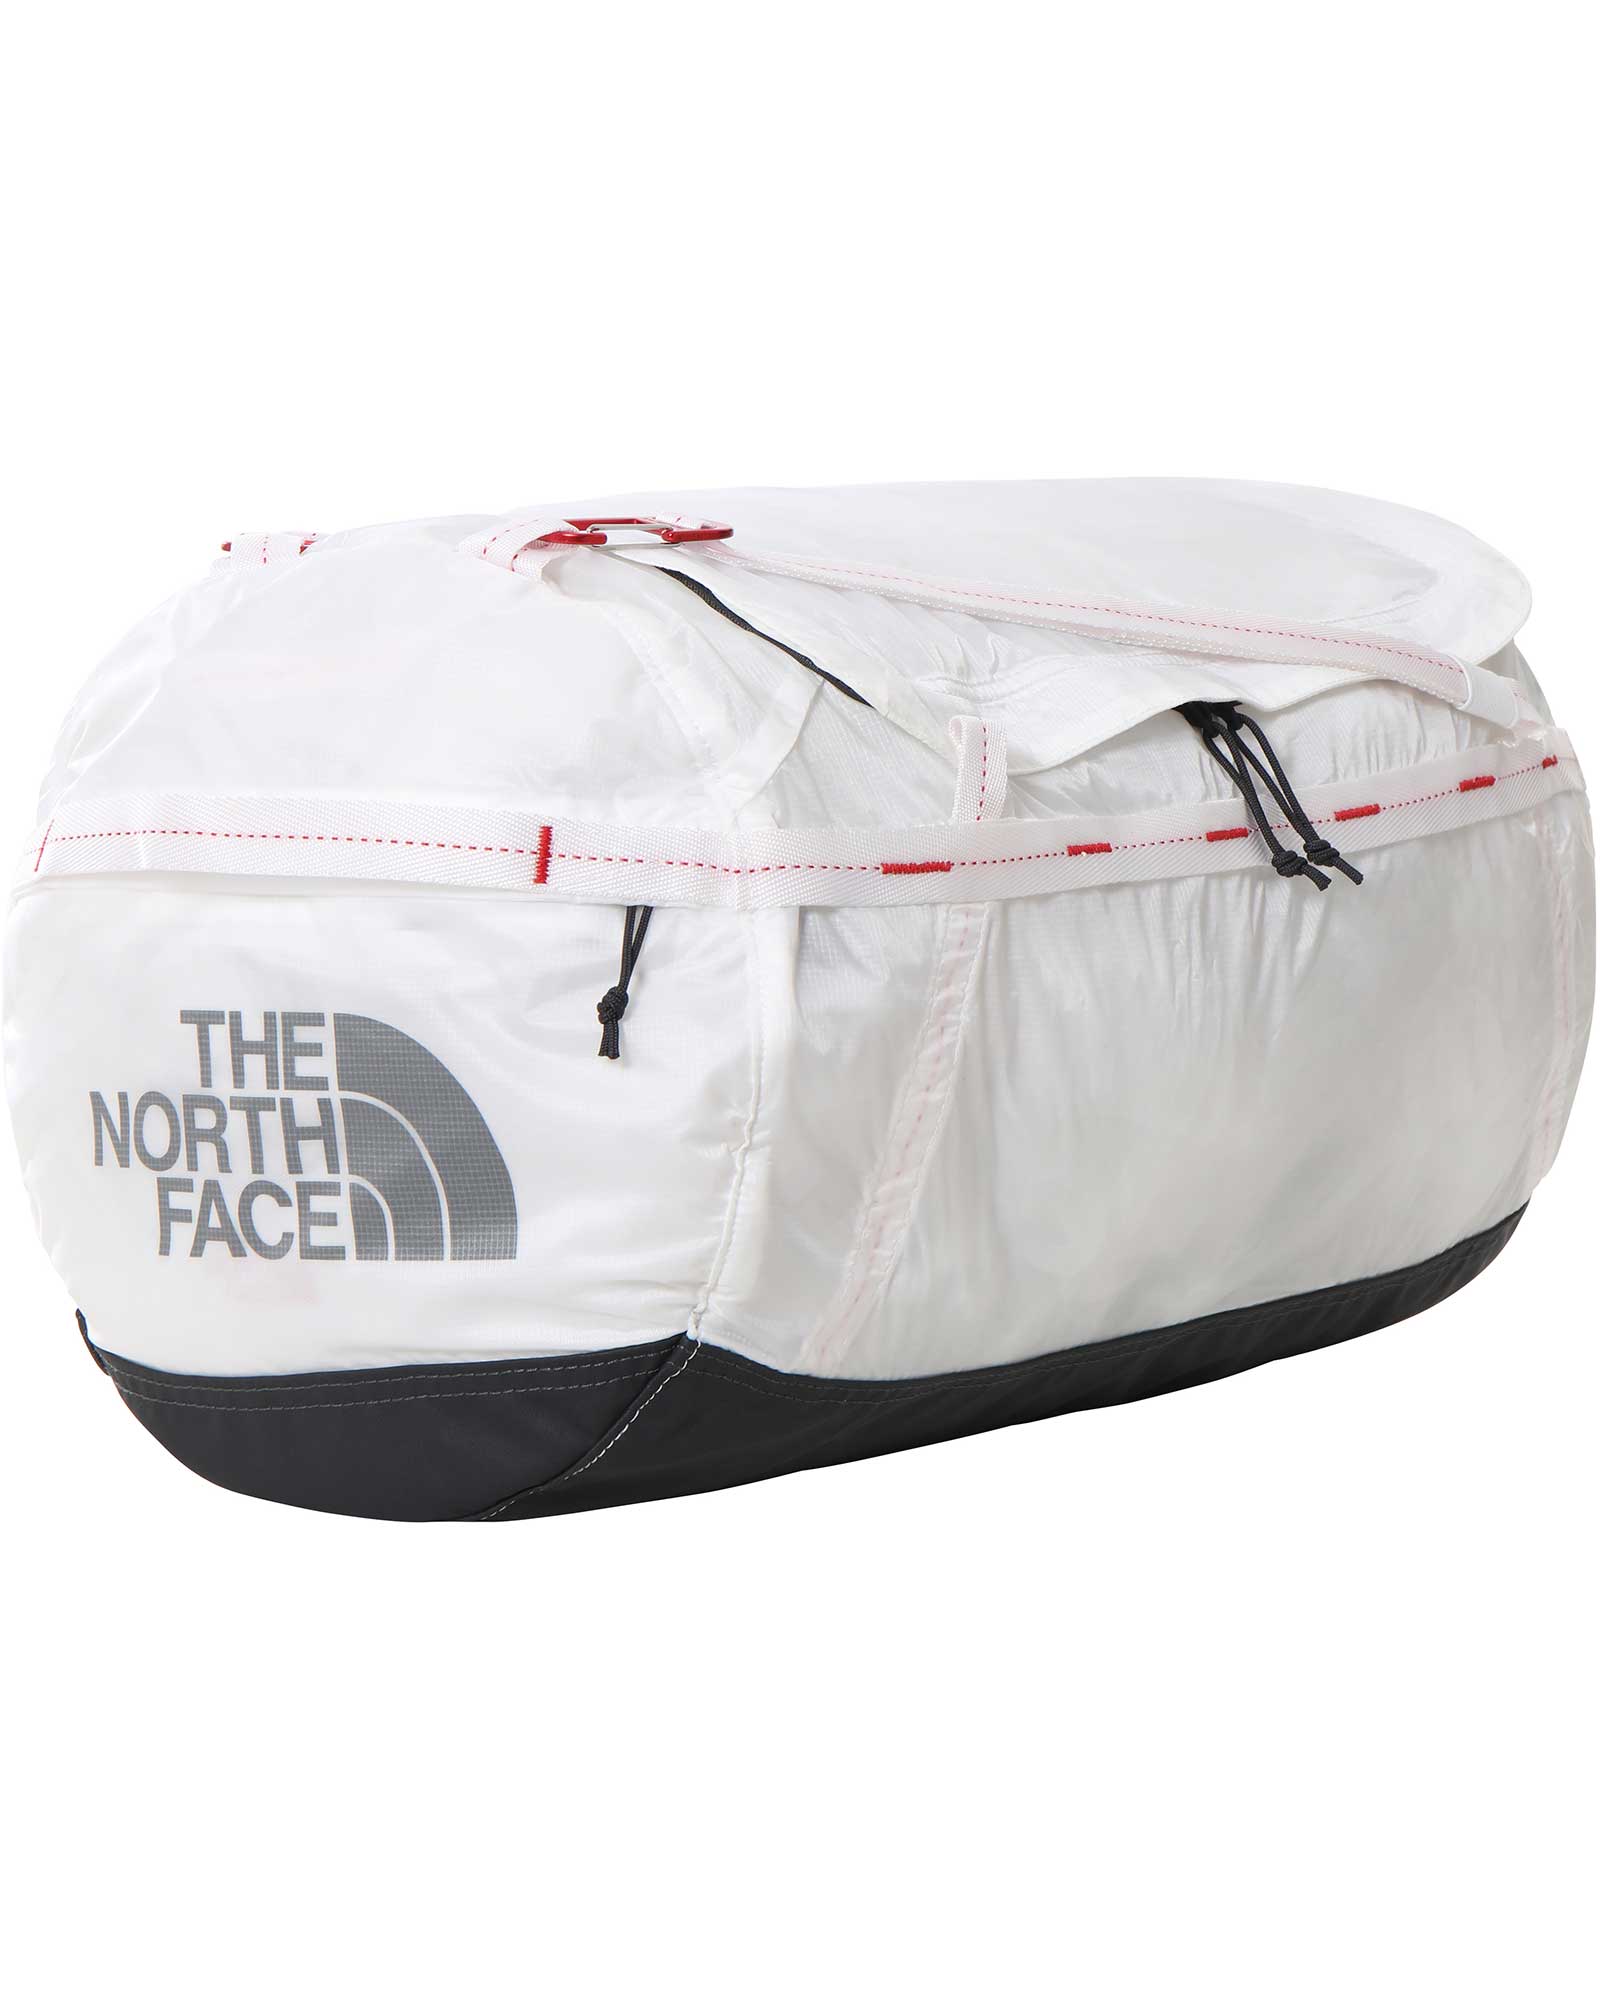 The North Face Flyweight Duffel